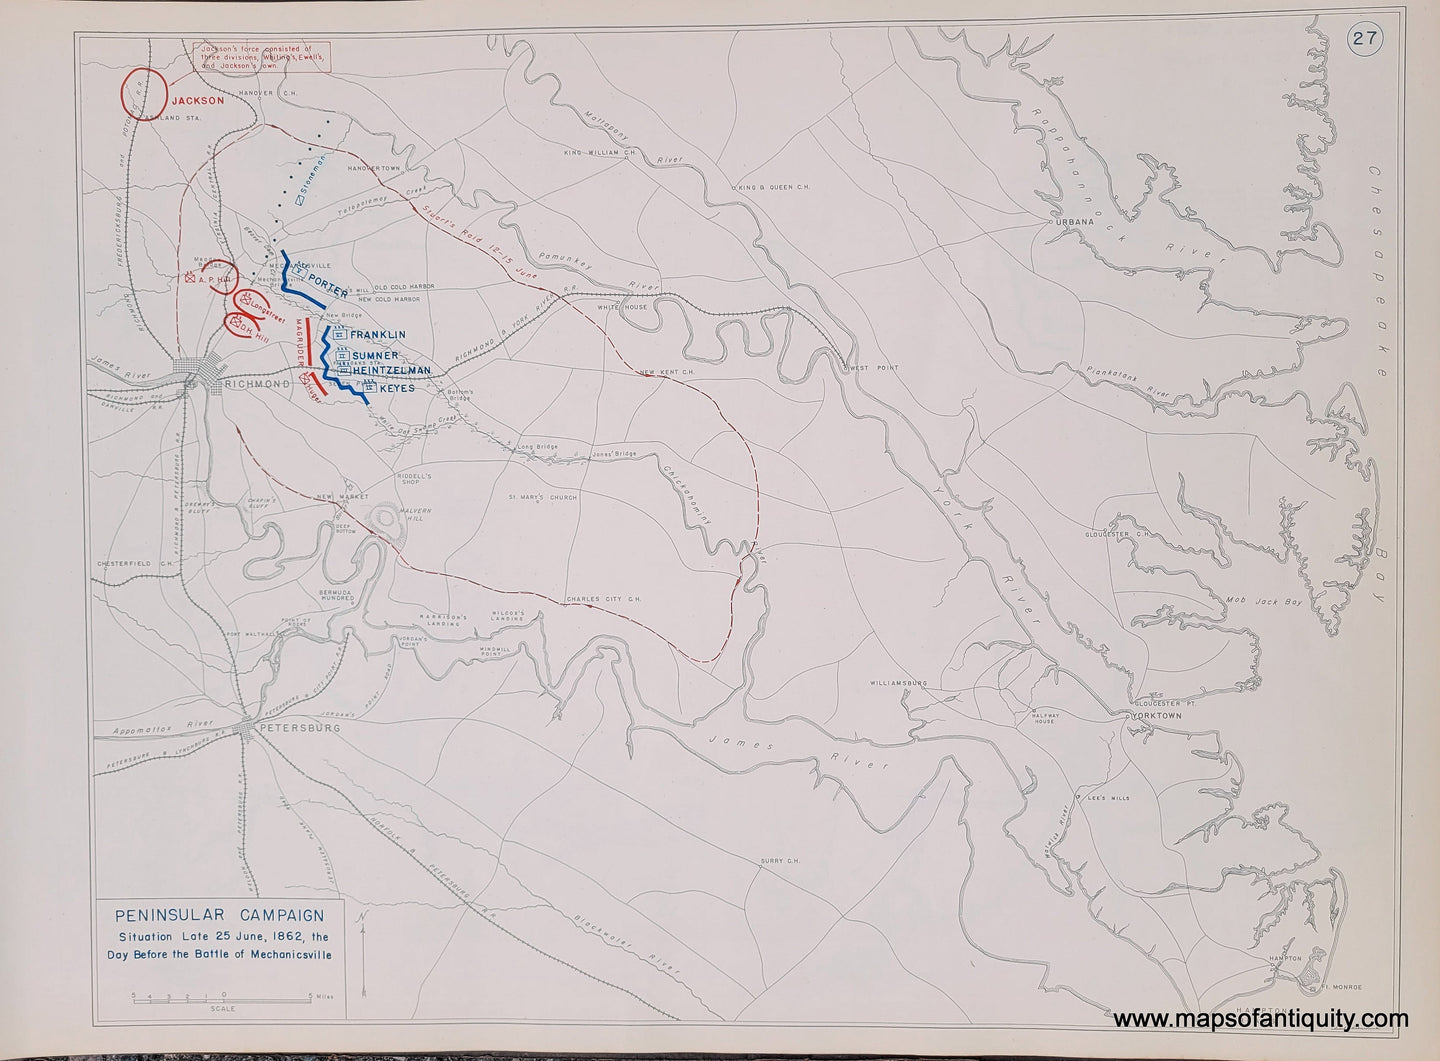 Genuine-Antique-Map-Peninsular-Campaign-Situation-Late-25-June-1862-the-Day-Before-the-Battle-of-Mechanicsville-1948-Matthew-Forney-Steele-Dept-of-Military-Art-and-Engineering-US-Military-Academy-West-Point-Maps-Of-Antiquity